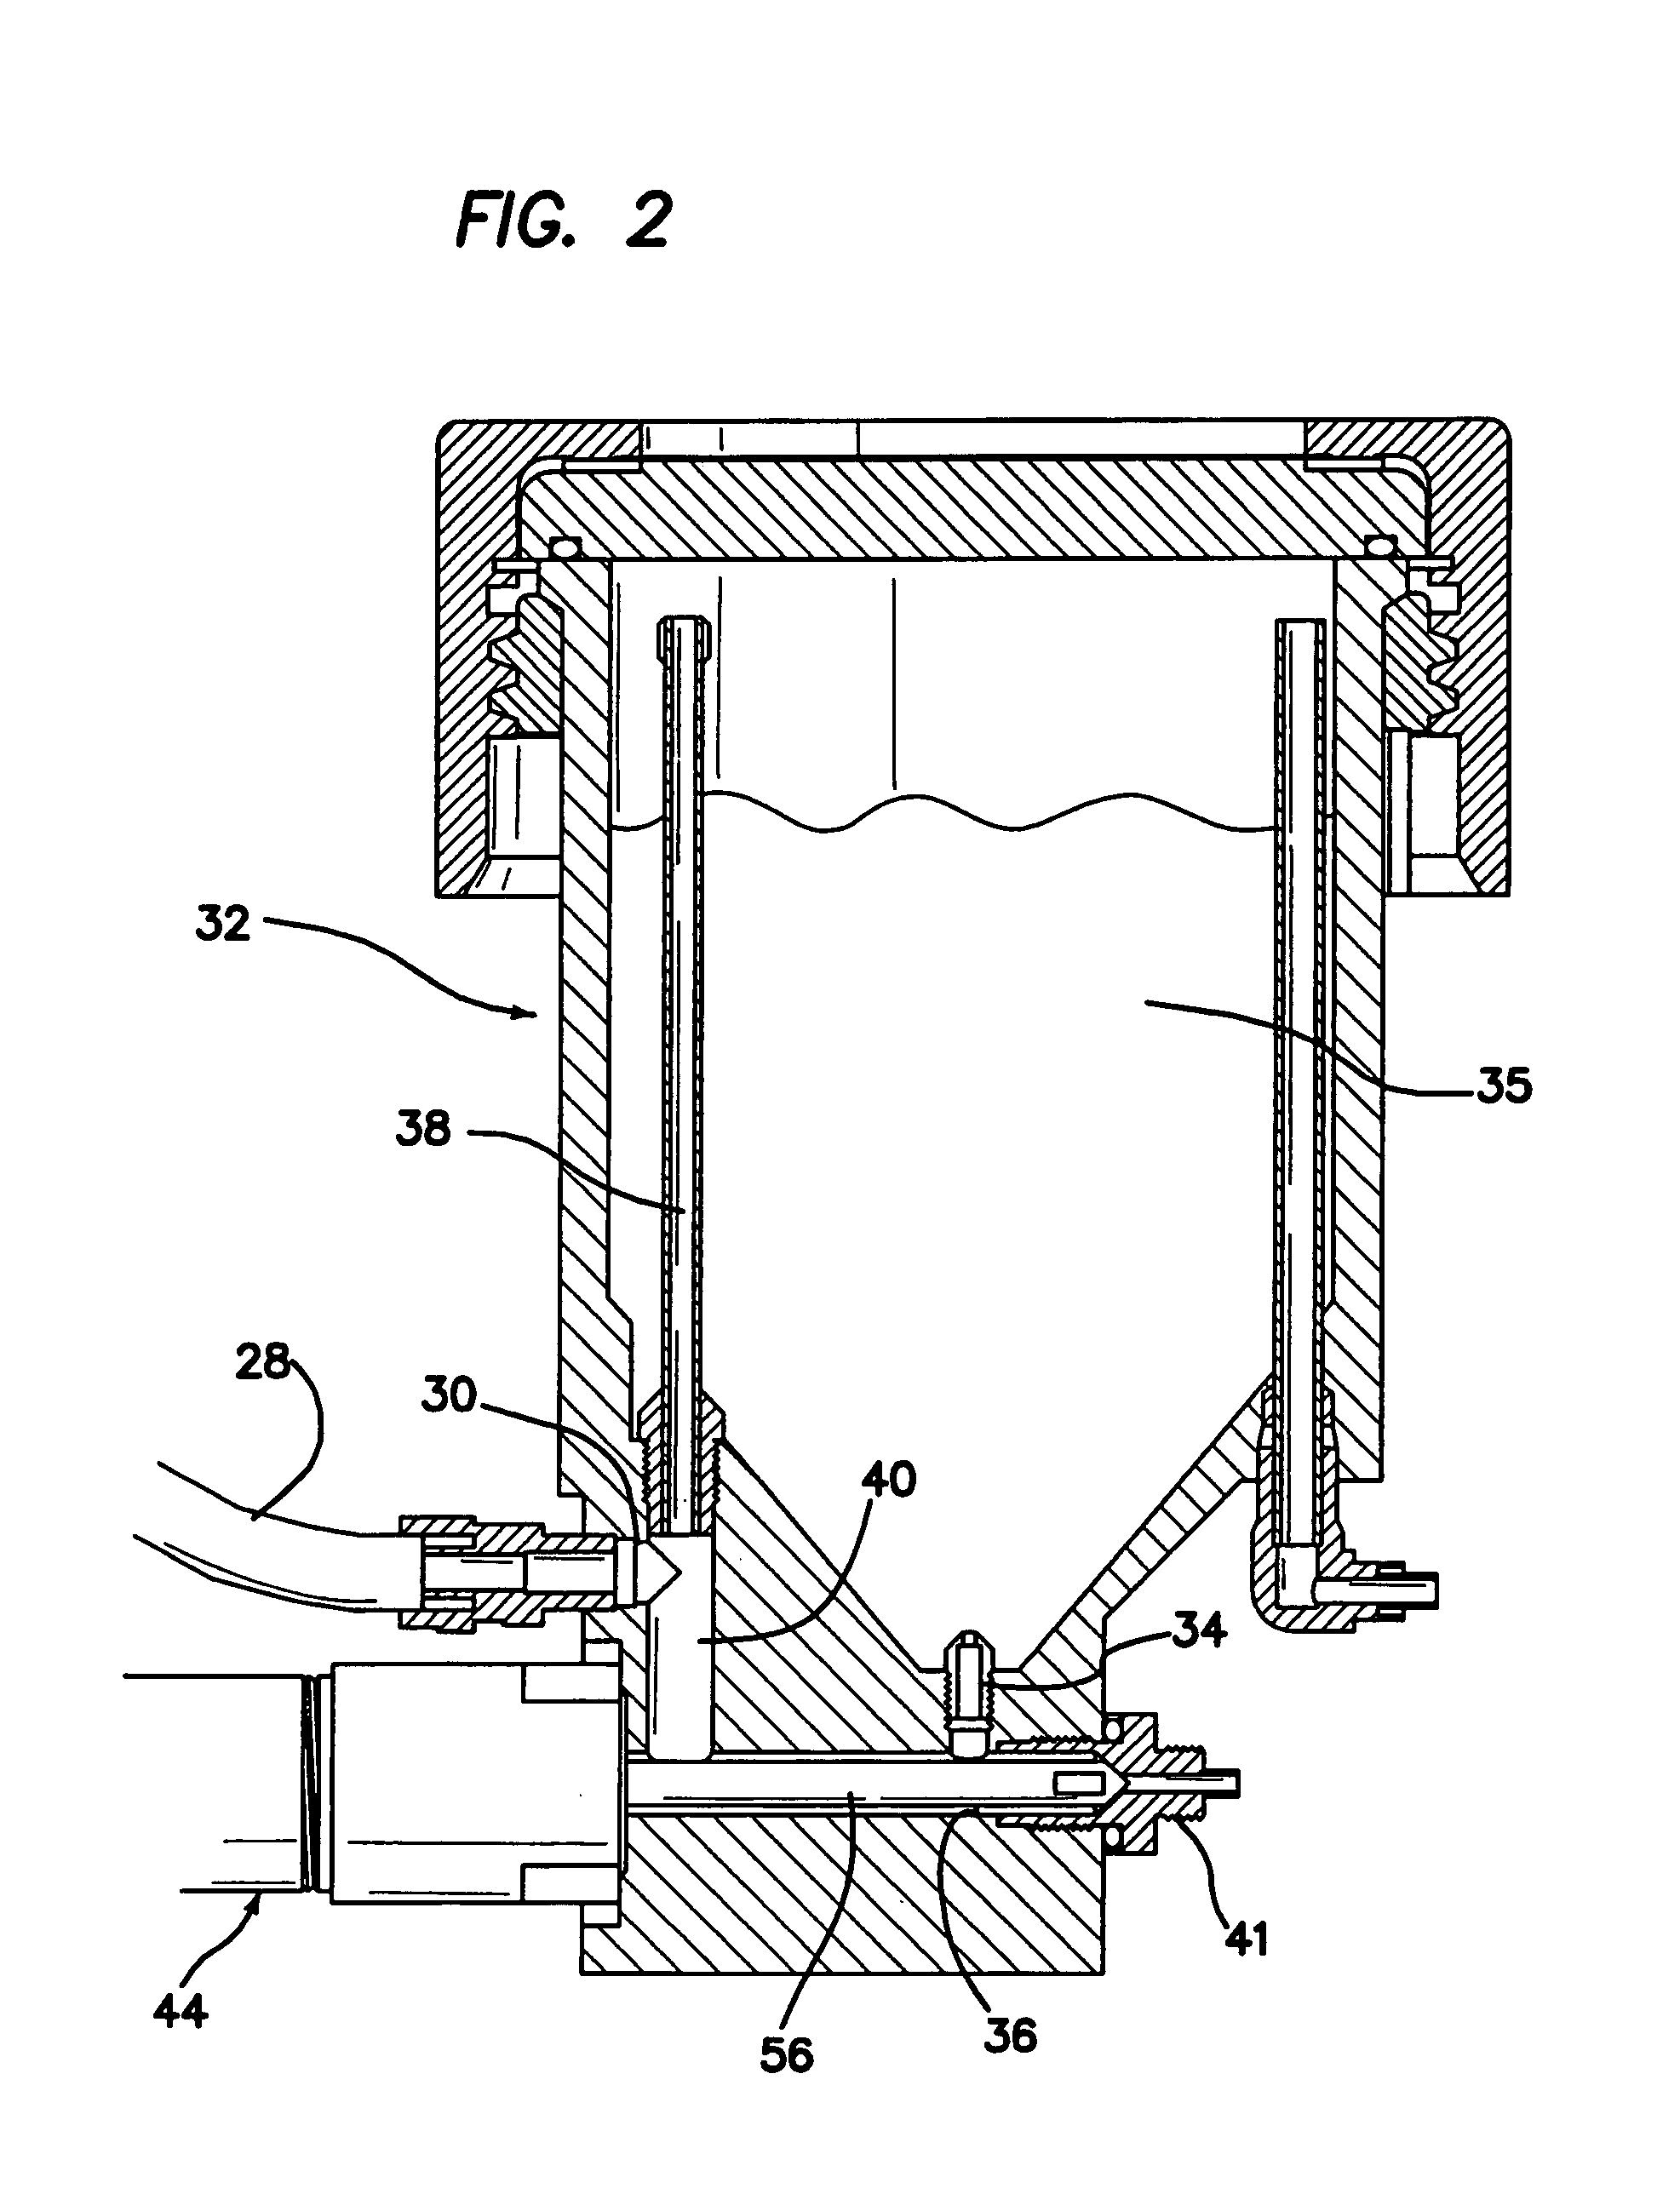 Apparatus and methods for dispensing particulate media